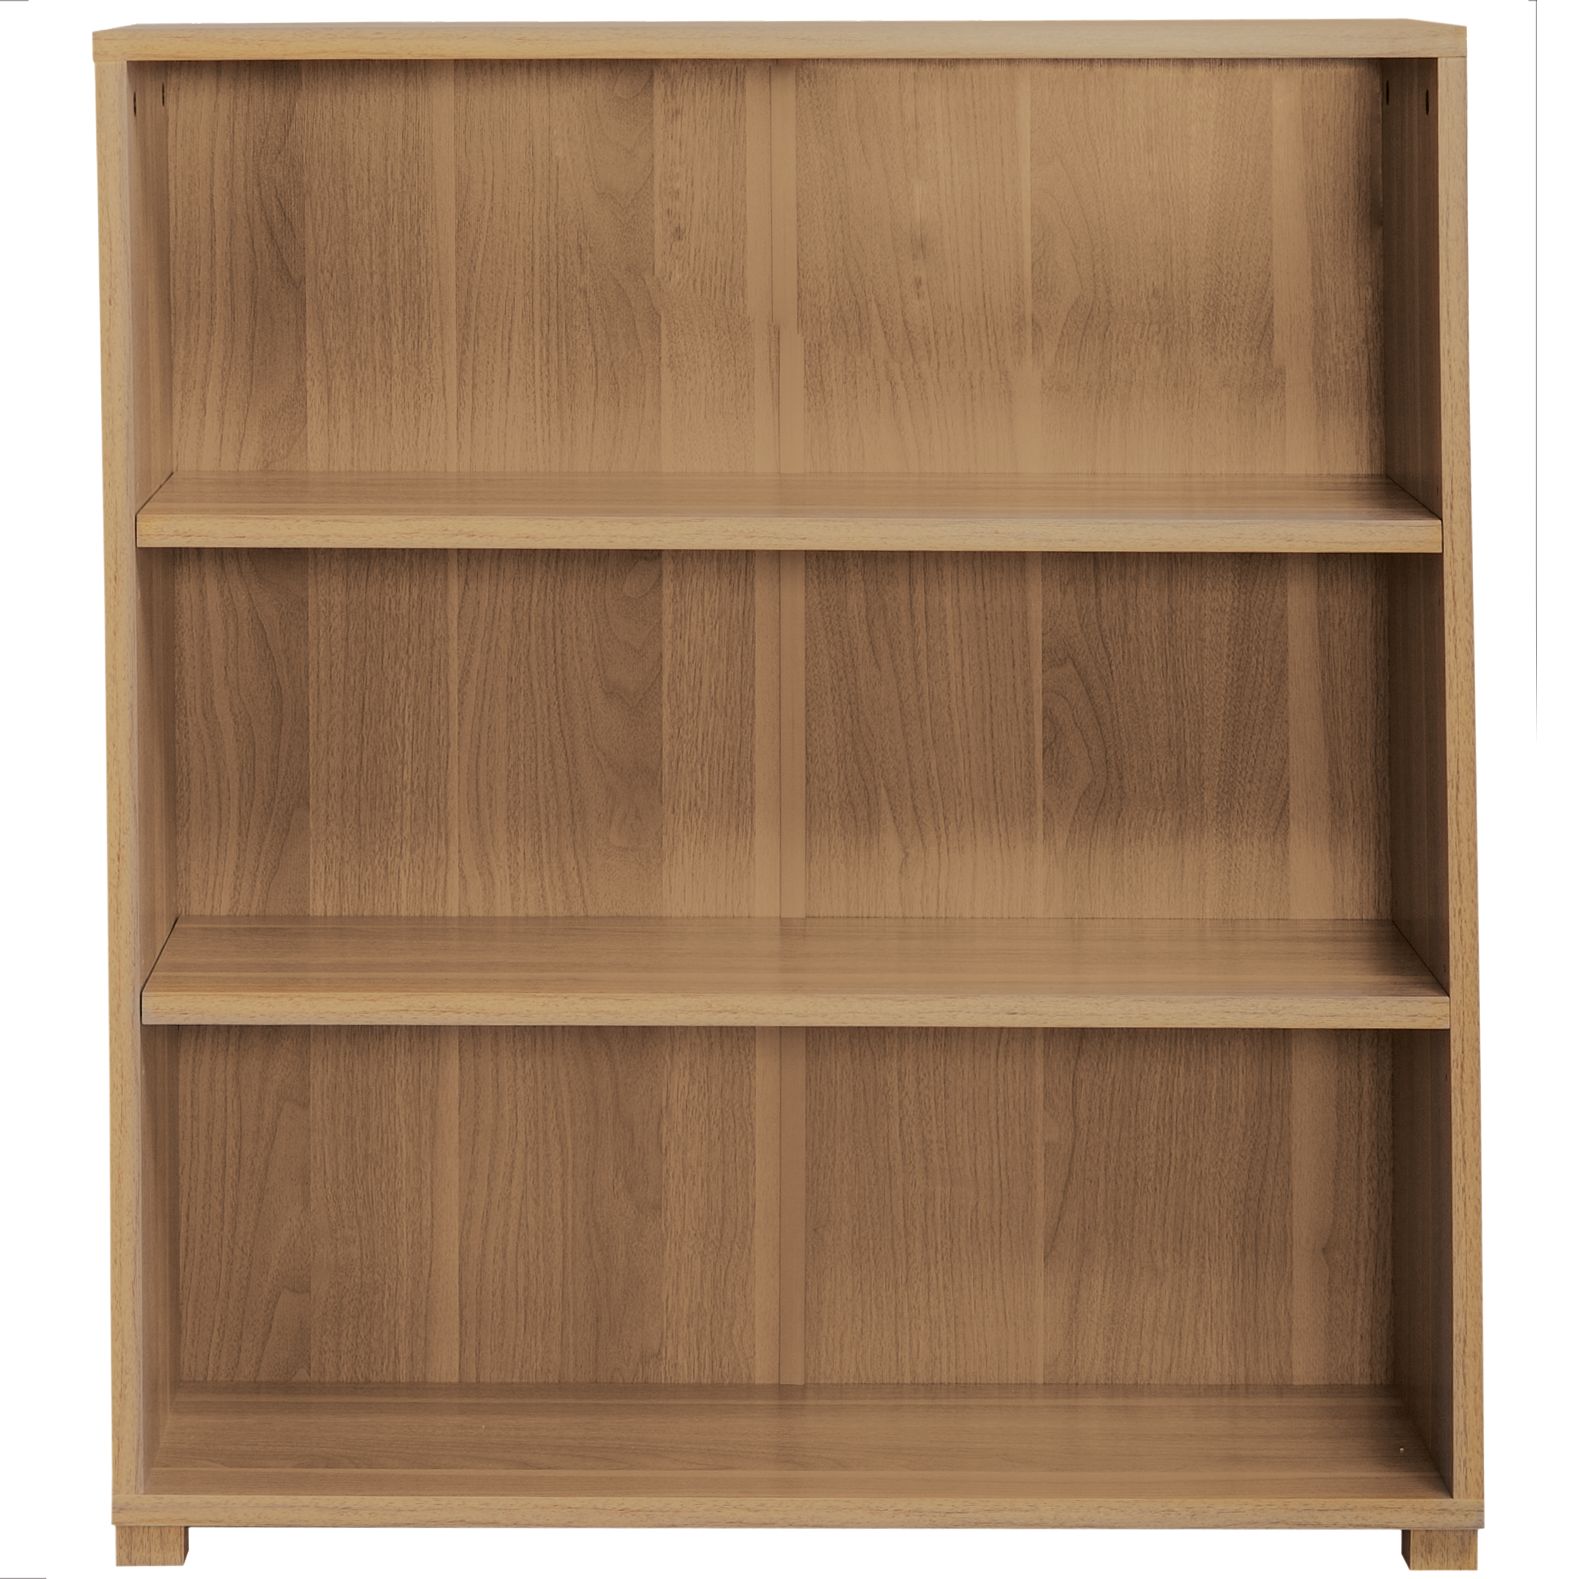 John Lewis Kirby Value Low, Wide Bookcase